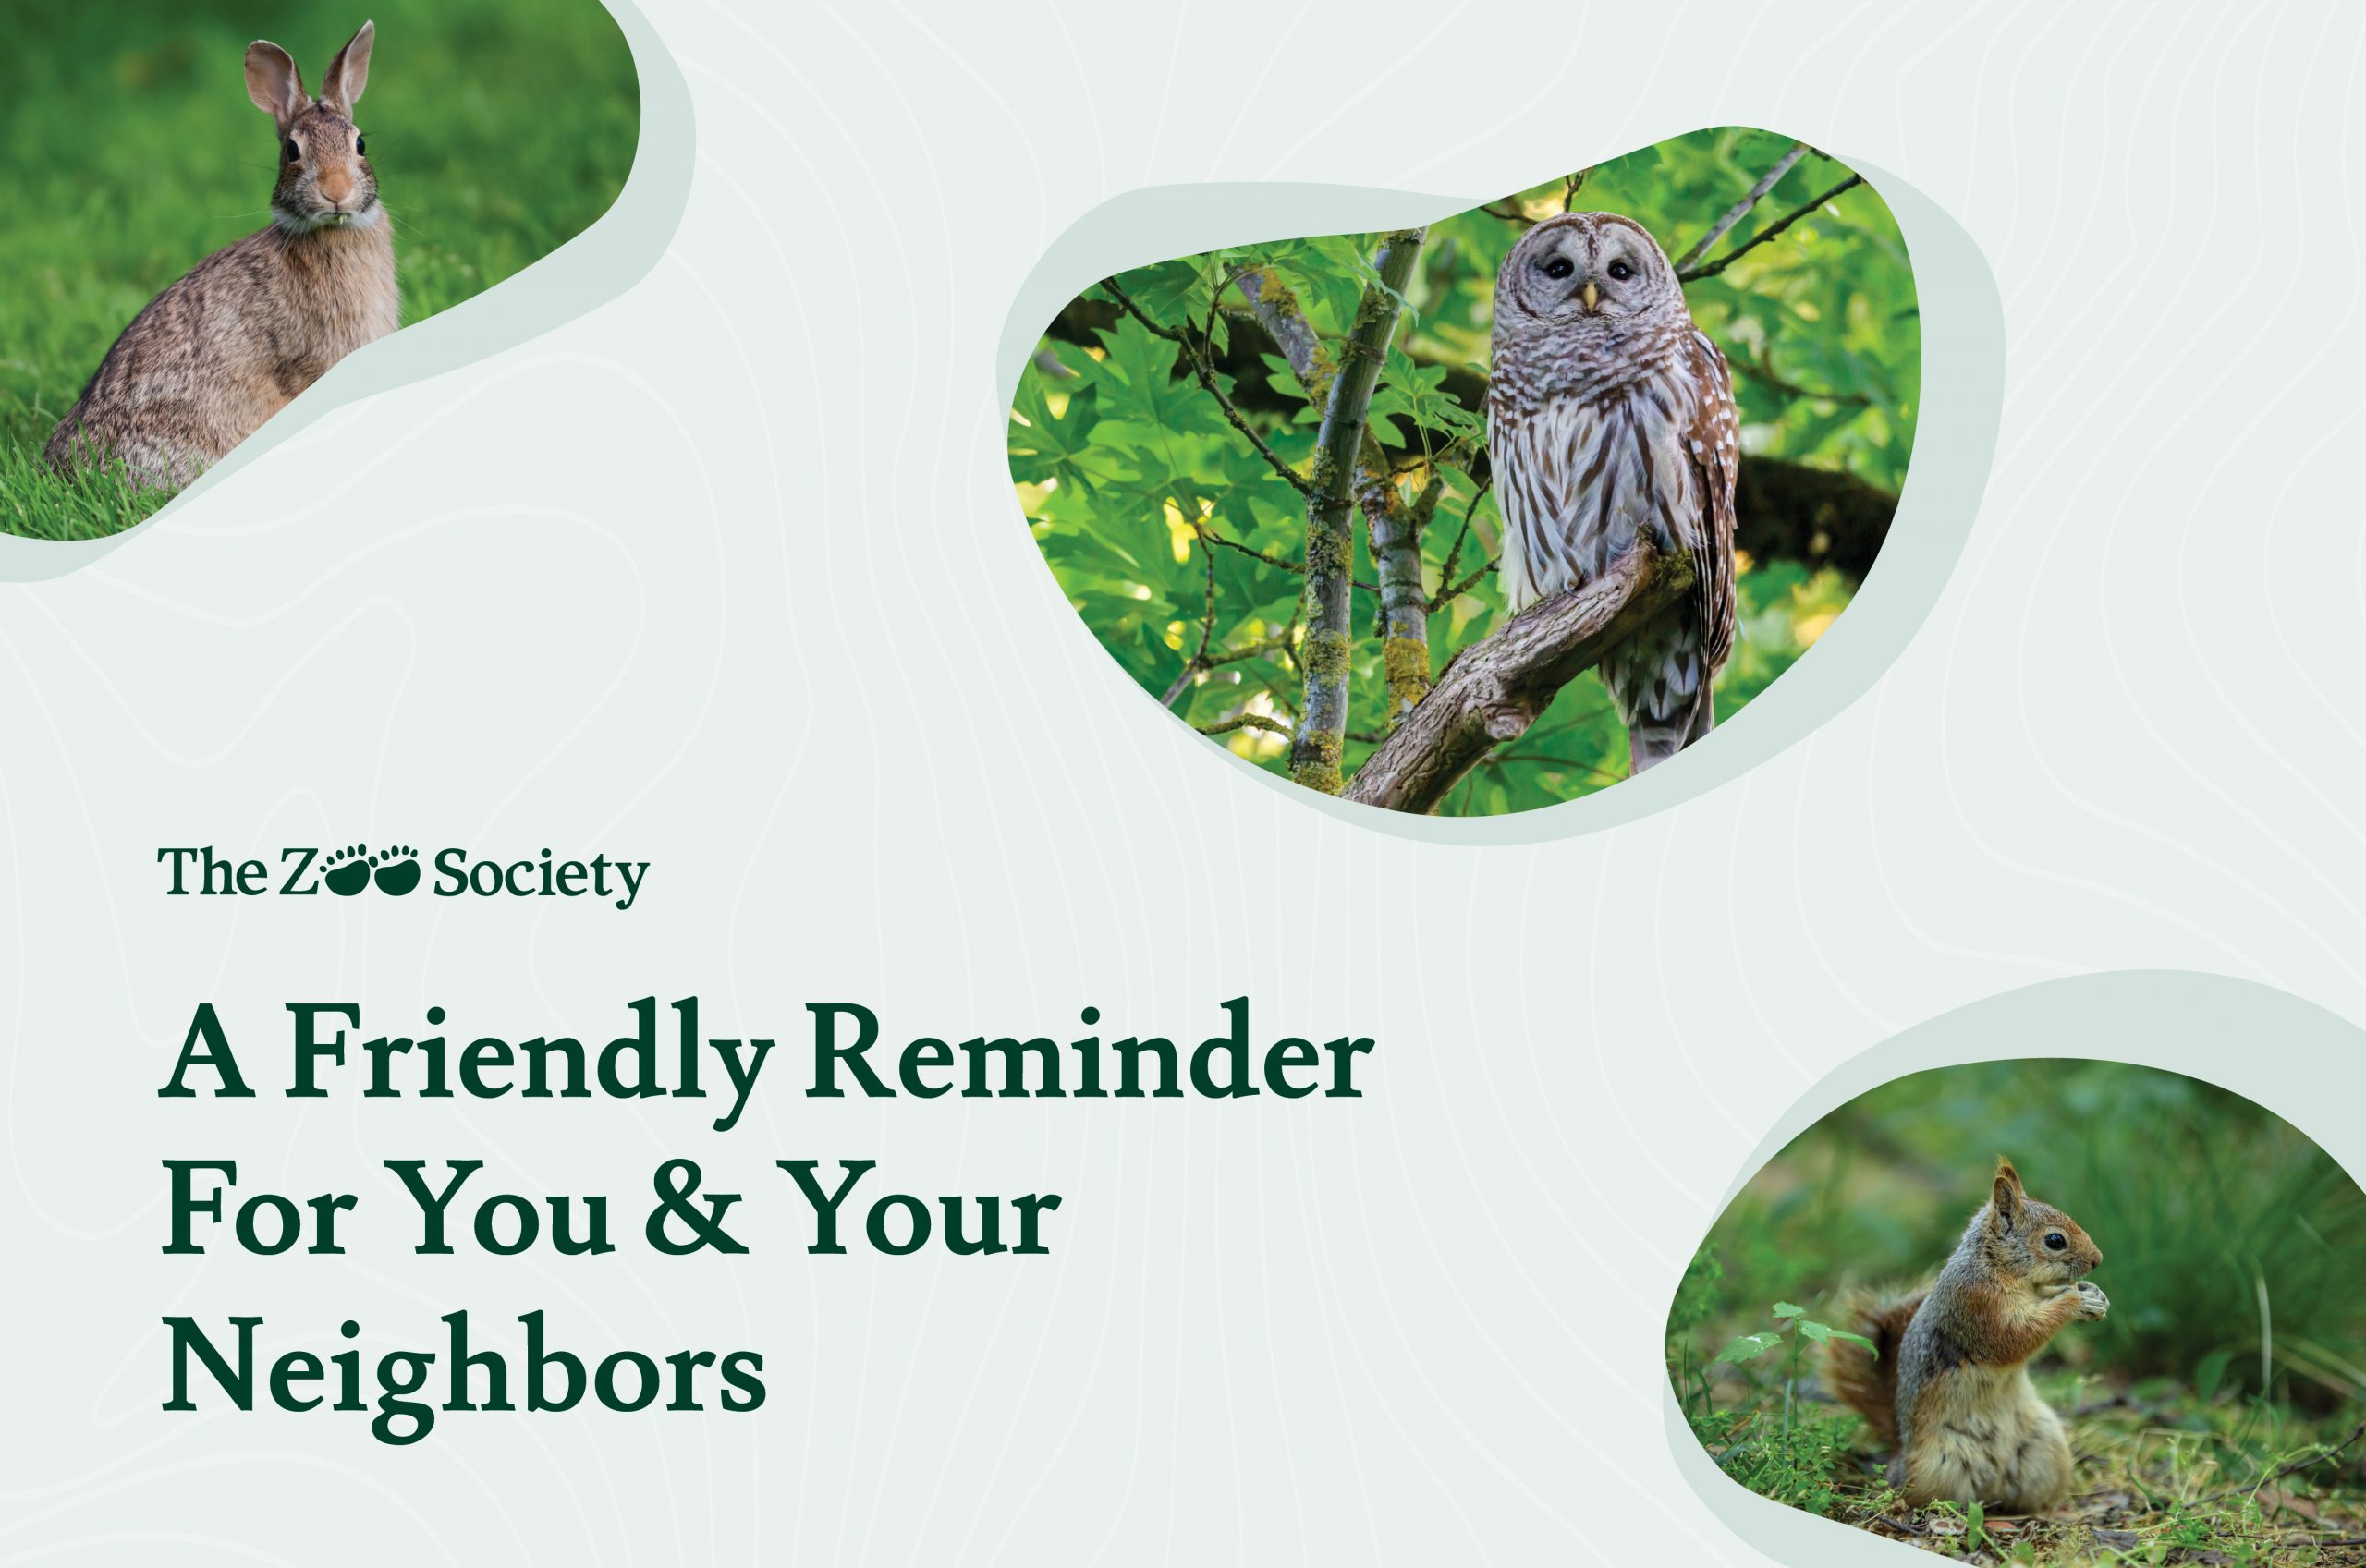 A Friendly Reminder for You and Your Neighbors